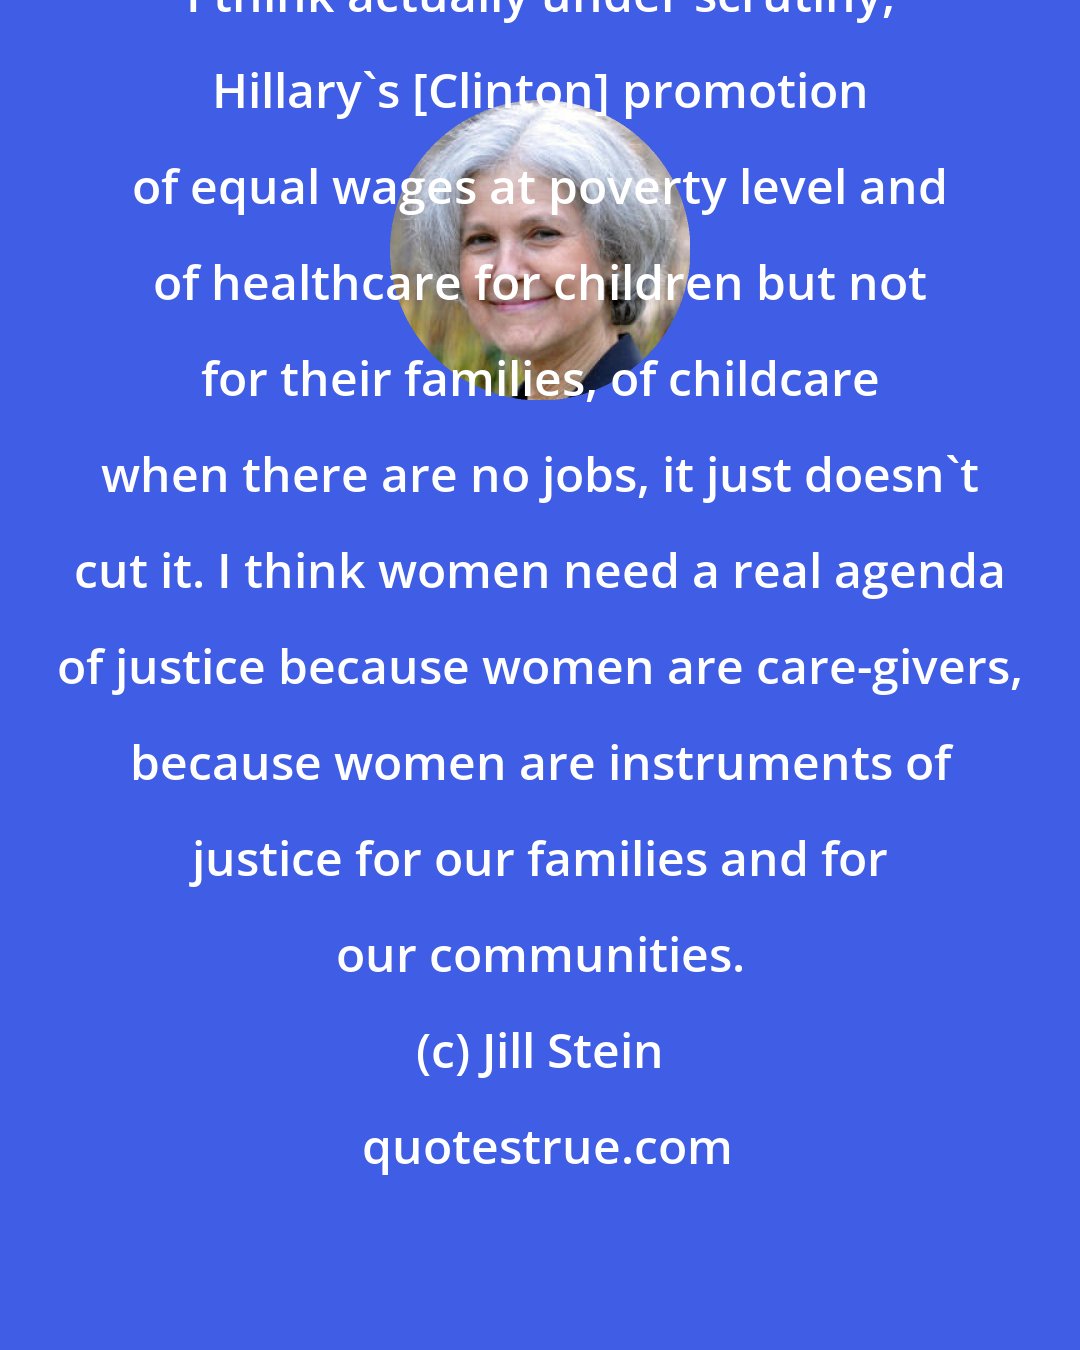 Jill Stein: I think actually under scrutiny, Hillary's [Clinton] promotion of equal wages at poverty level and of healthcare for children but not for their families, of childcare when there are no jobs, it just doesn't cut it. I think women need a real agenda of justice because women are care-givers, because women are instruments of justice for our families and for our communities.